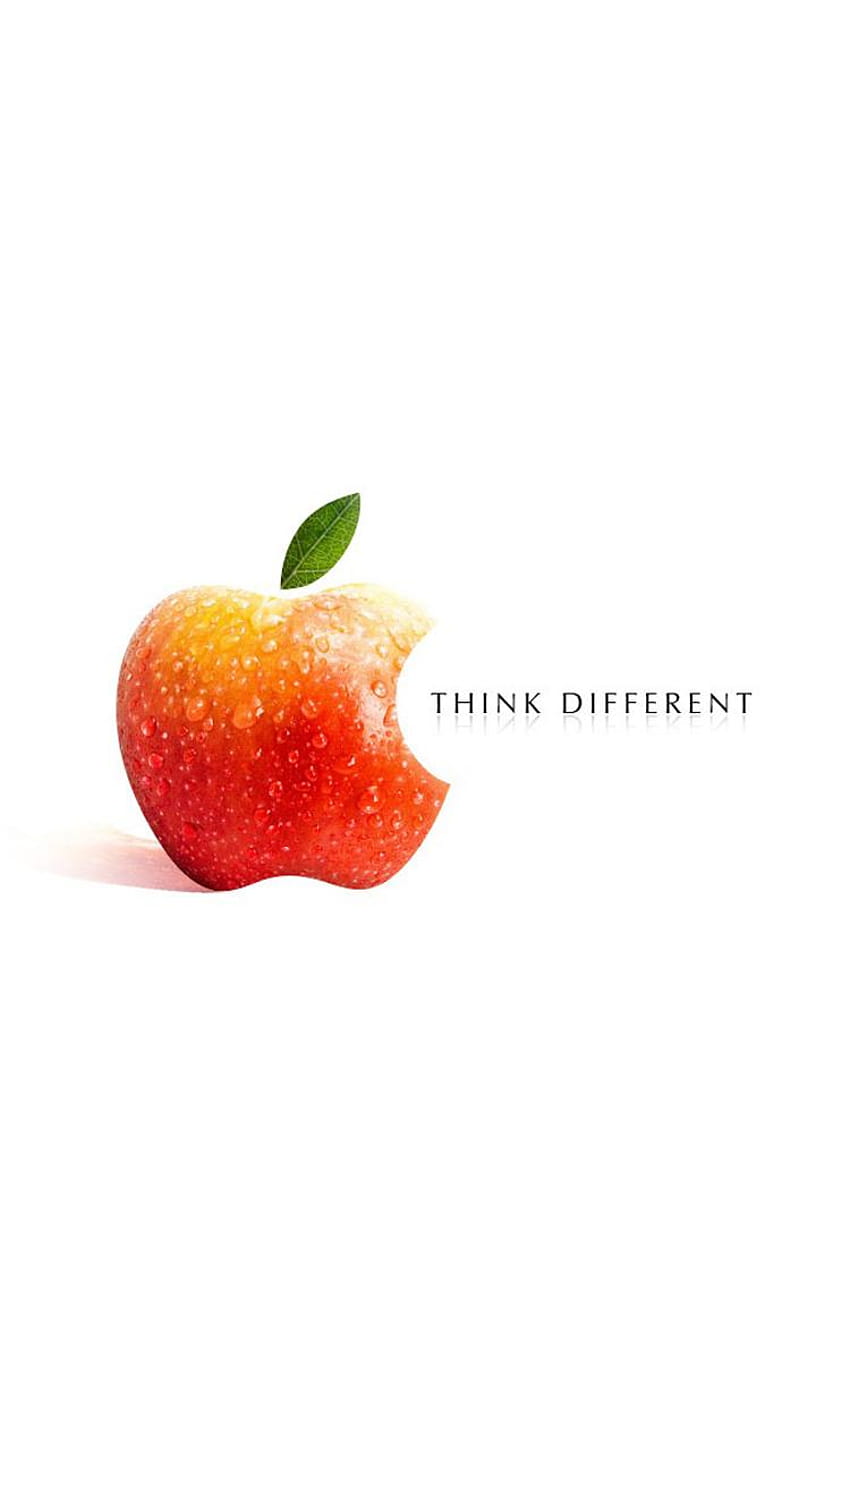 Think Different Apple – Mobile, think different mobile HD тапет за телефон